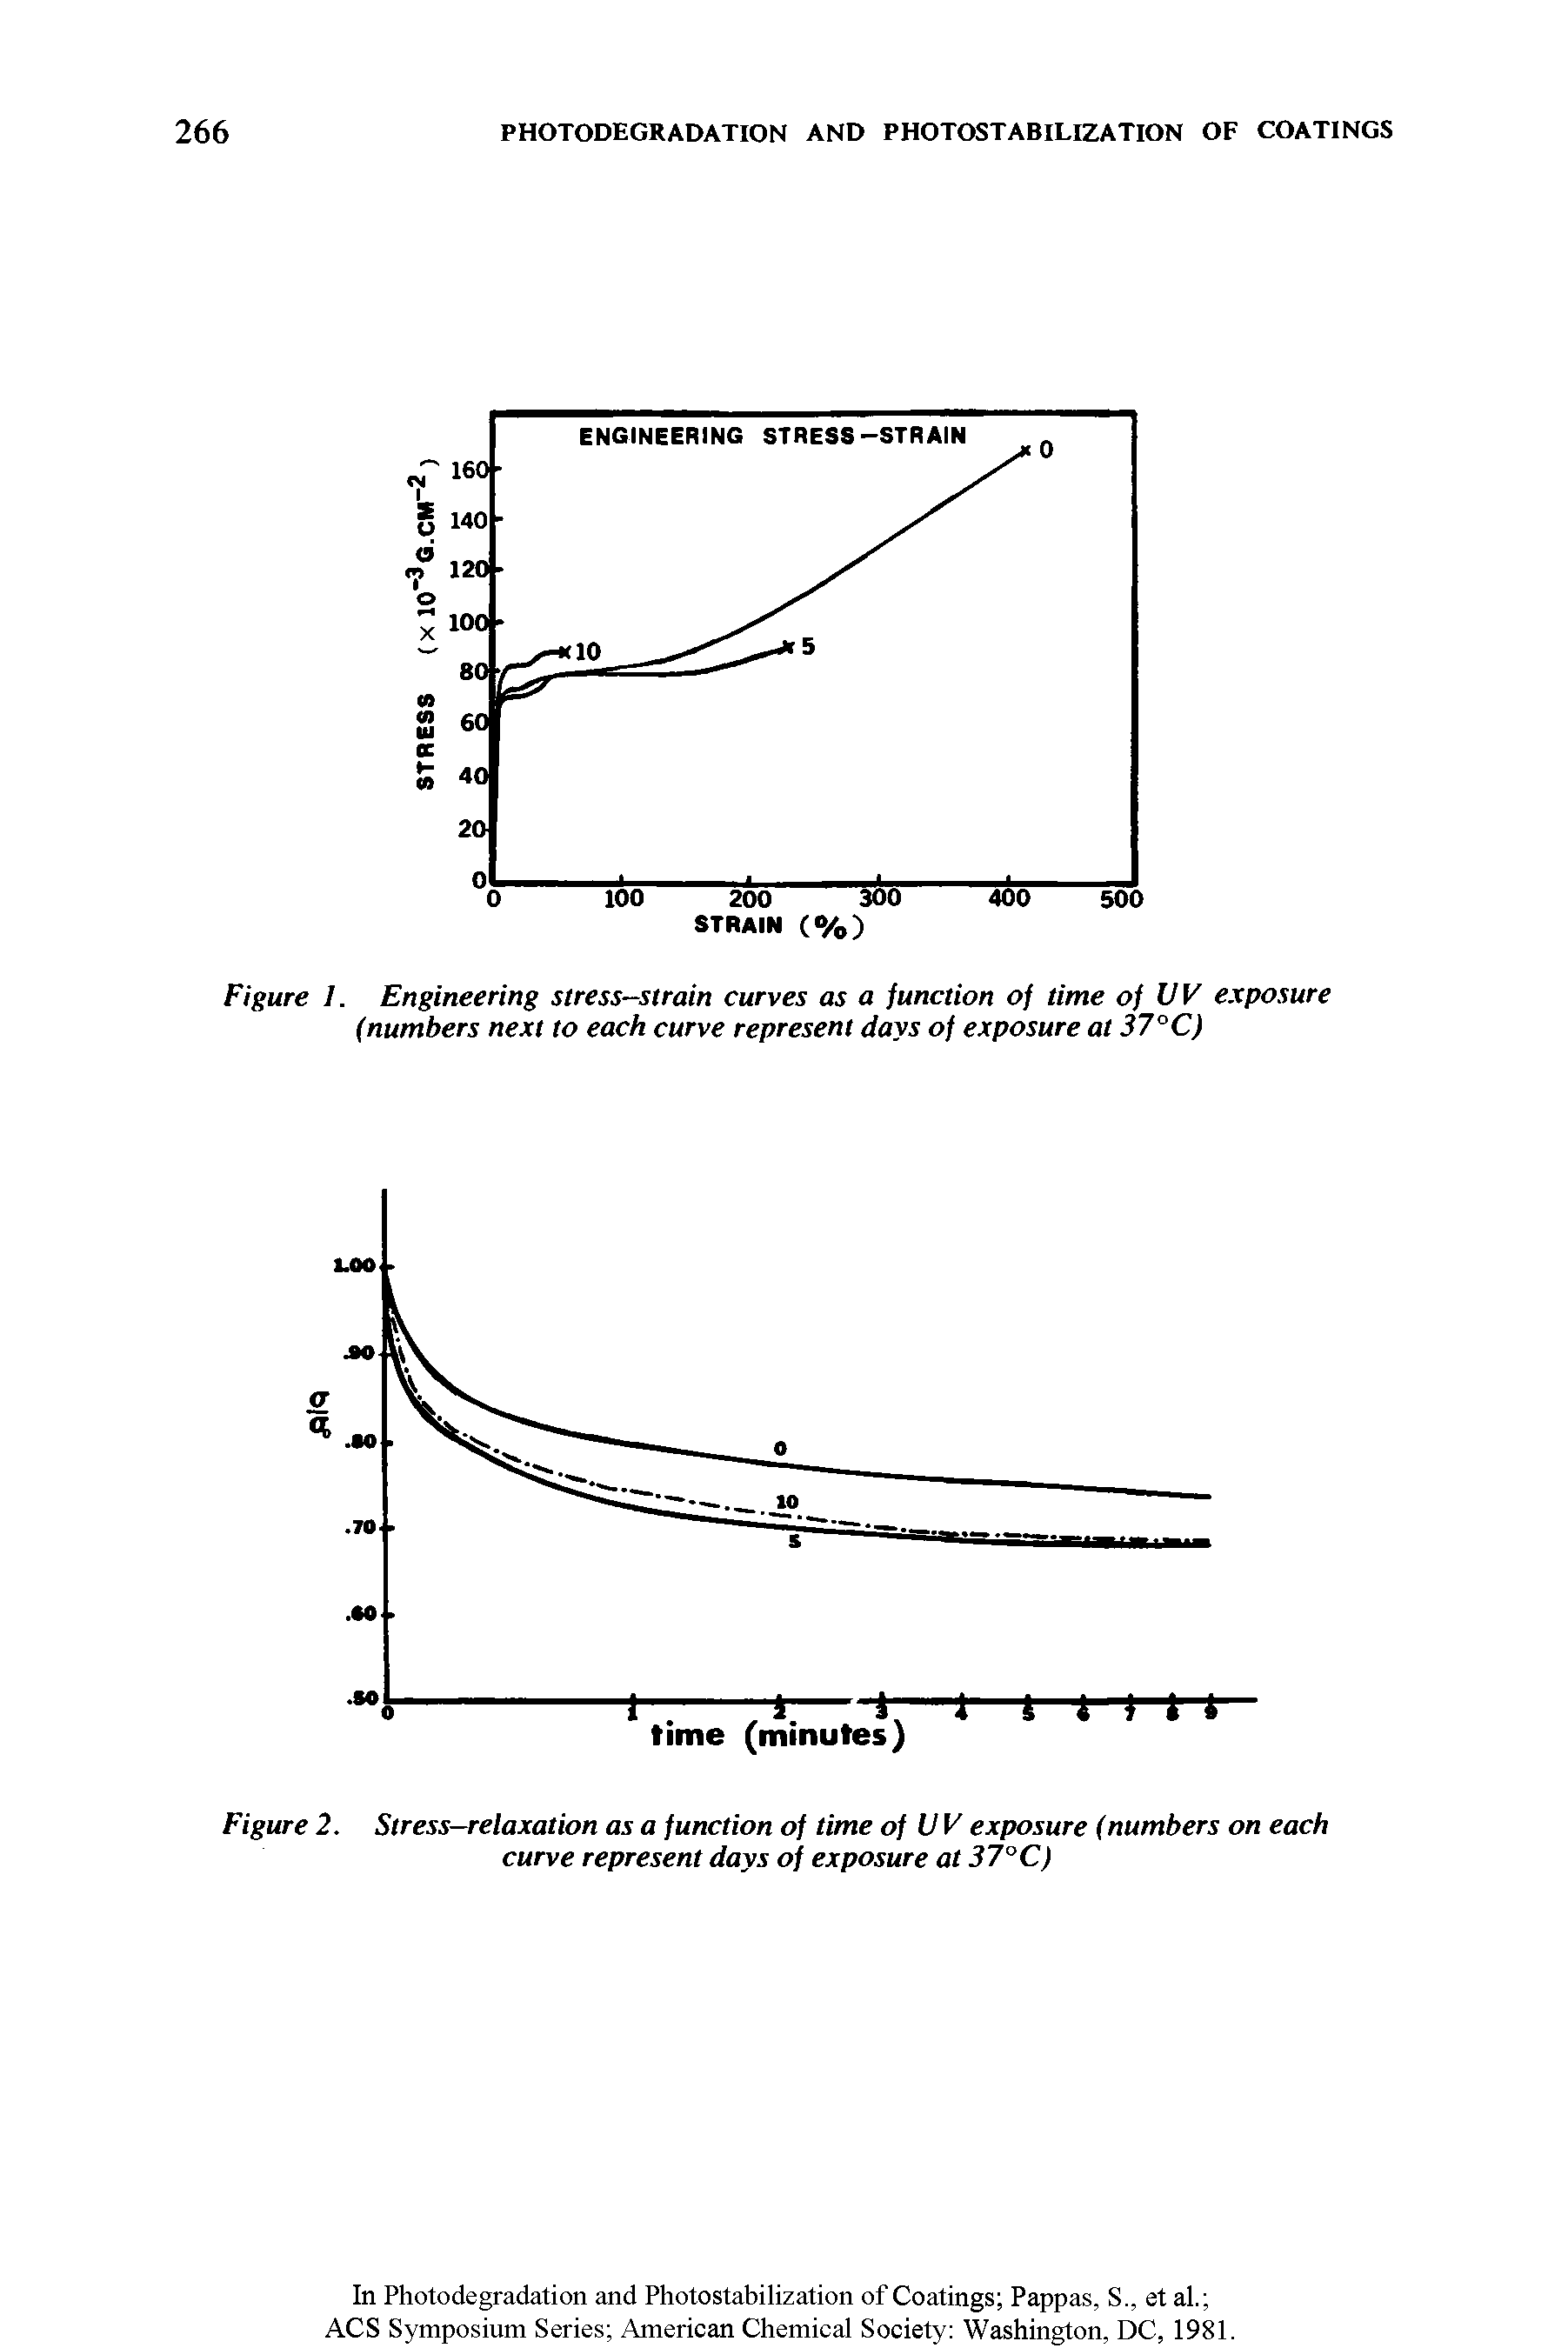 Figure 1. Engineering stress-strain curves as a function of time of UV exposure (numbers next to each curve represent days of exposure at 37°C)...